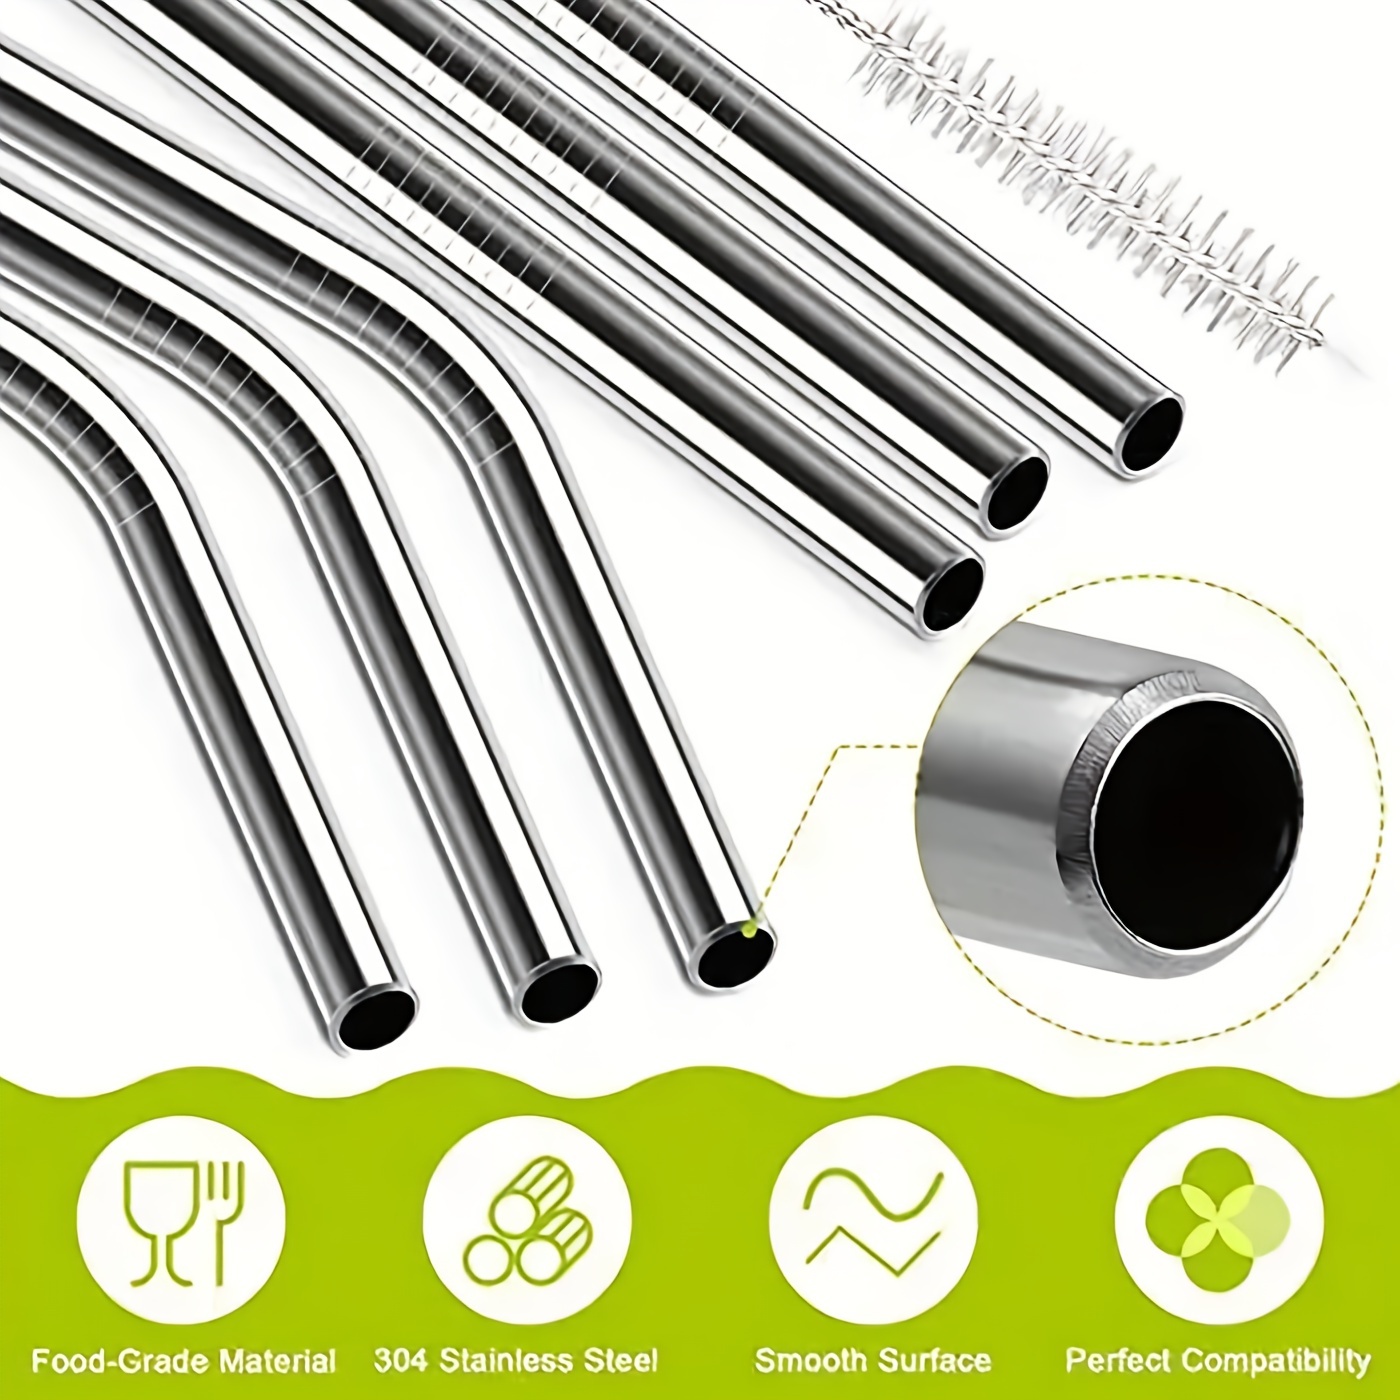 Stainless Steel Straws For Stanley Cups Travel Tumbler, Reusable